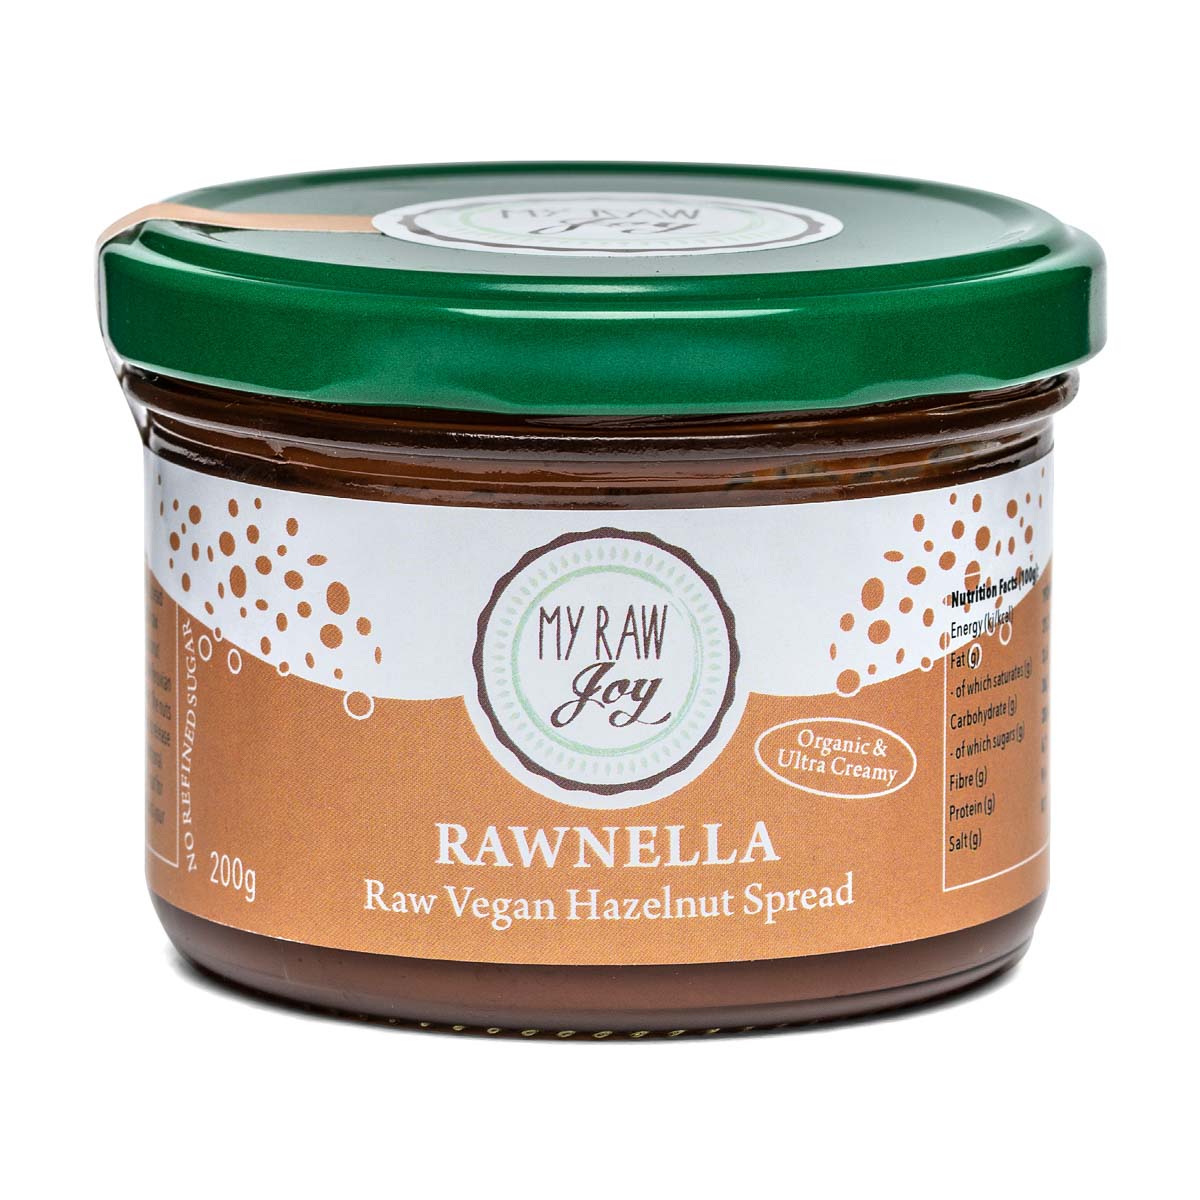 Activated Rawnella Spread | My Raw Joy | Raw Living UK | Raw Foods | Nut Butters | My Raw Joy Activated Rawnella Spread is a Raw Vegan Activated Hazelnut Nut Butter made with Raw Peruvian Cacao &amp; Vanilla for a nutritious chocolate spread.